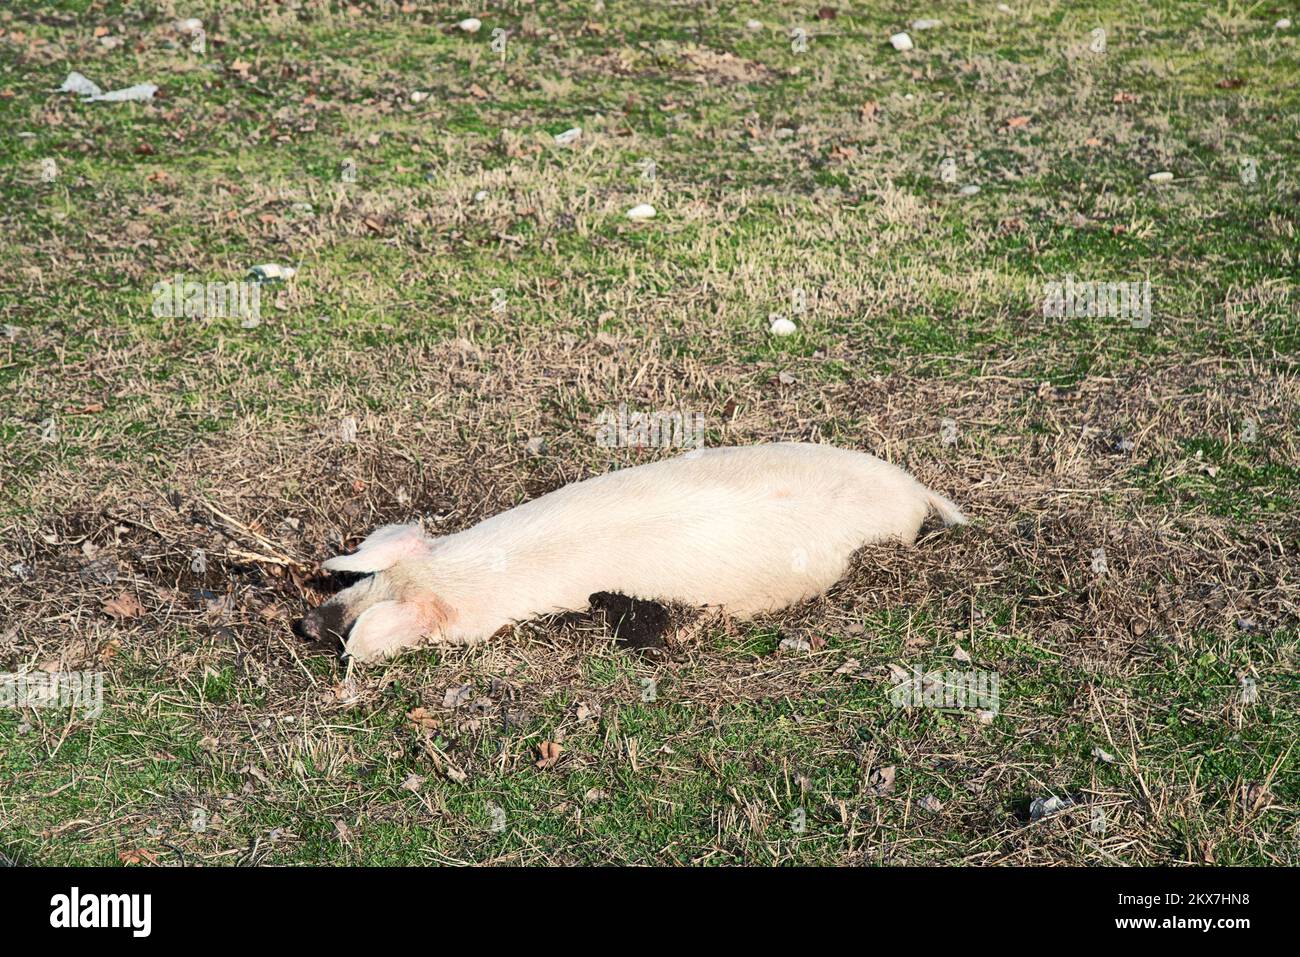 A white pig burrowed into the spring mud Stock Photo